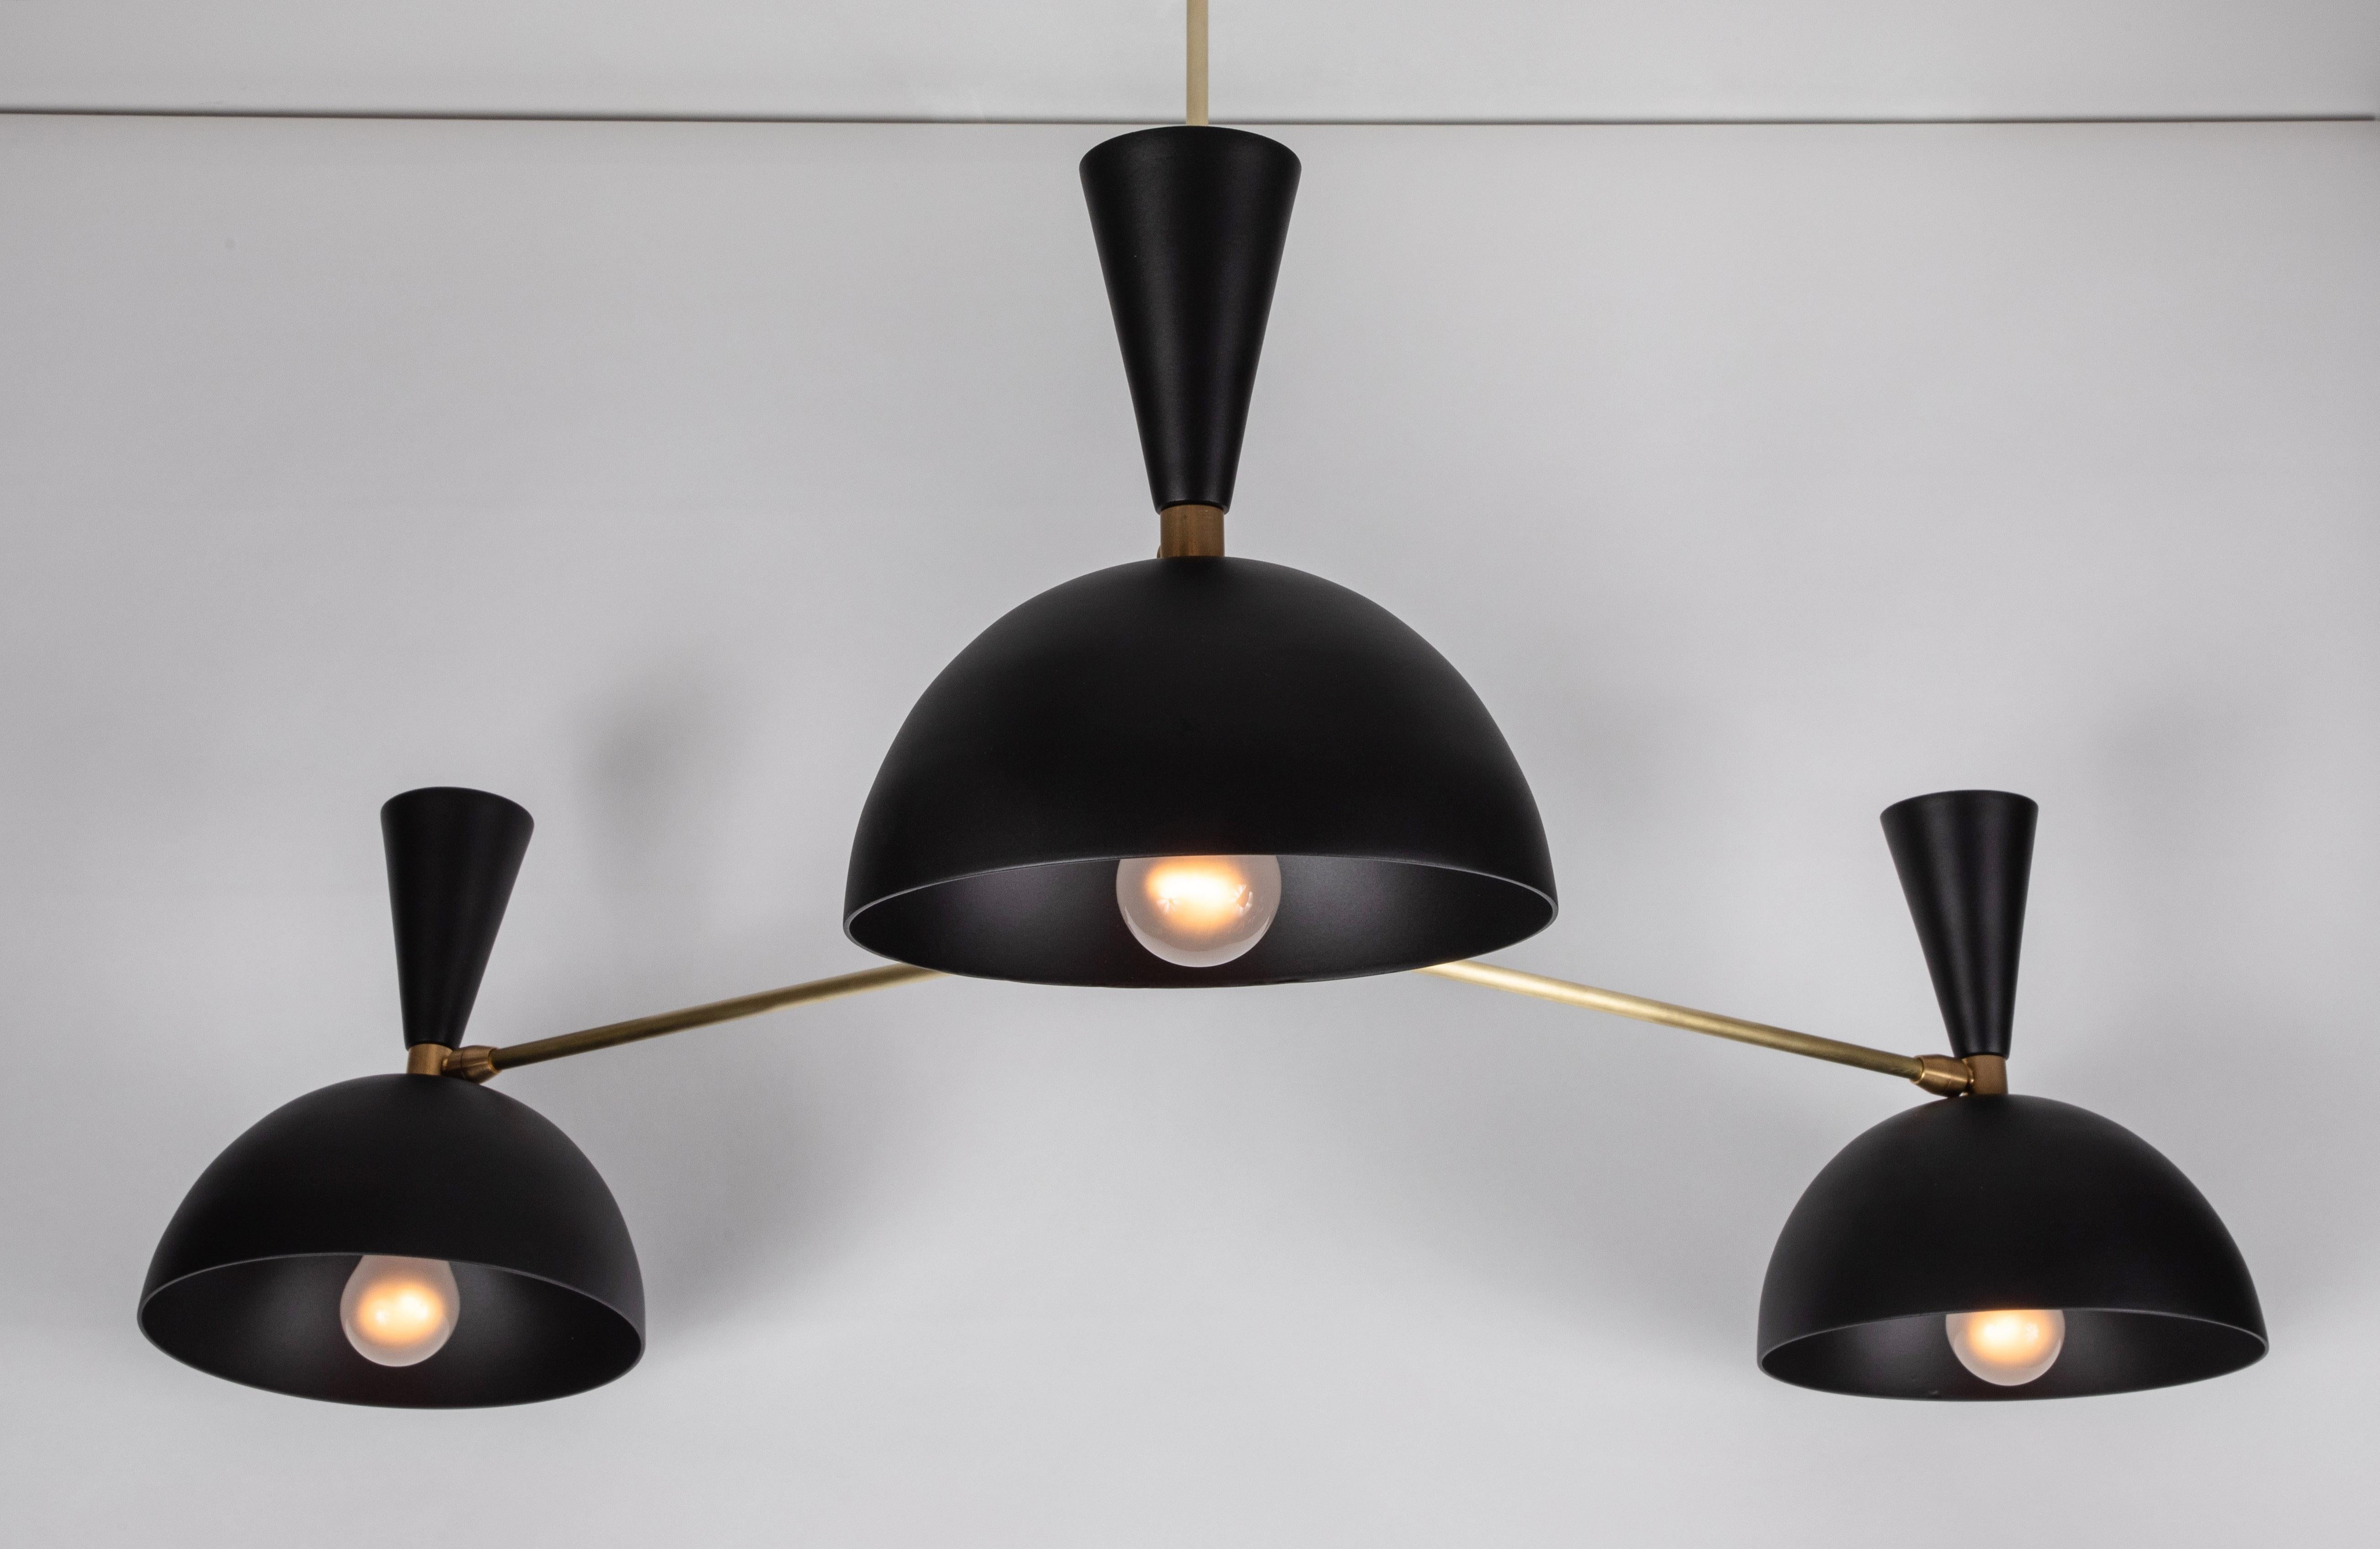 Large three-cone 'Lola II' chandelier in black and brass. 

Hand-fabricated by Los Angeles based designer and lighting professional Alvaro Benitez, this highly refined chandelier is reminiscent of the iconic midcentury Italian designs of Arteluce